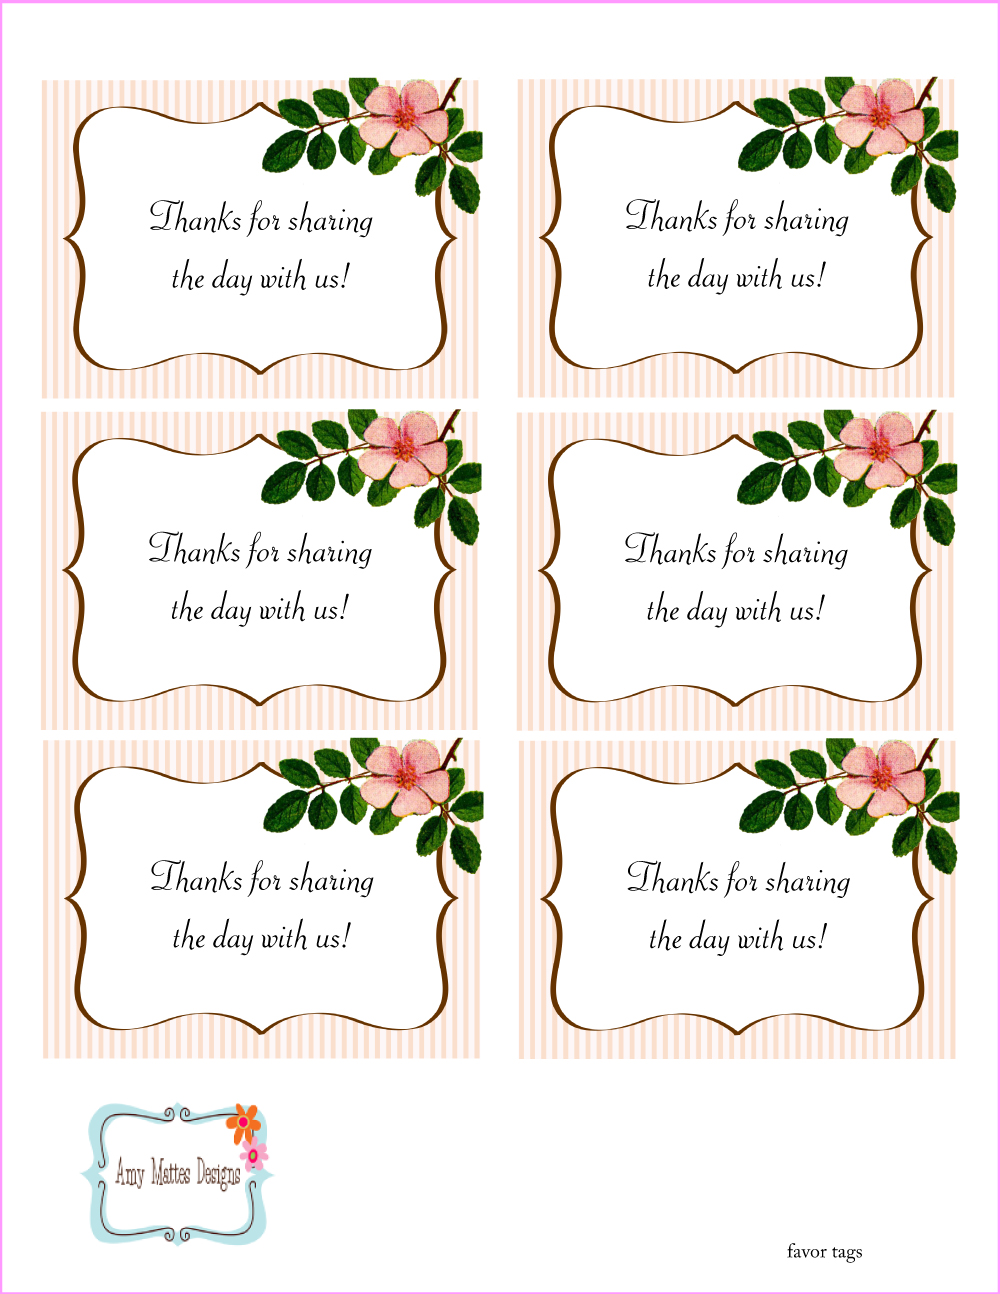 6-best-images-of-happy-mother-s-day-printable-tags-happy-mother-s-day-printable-gift-tags